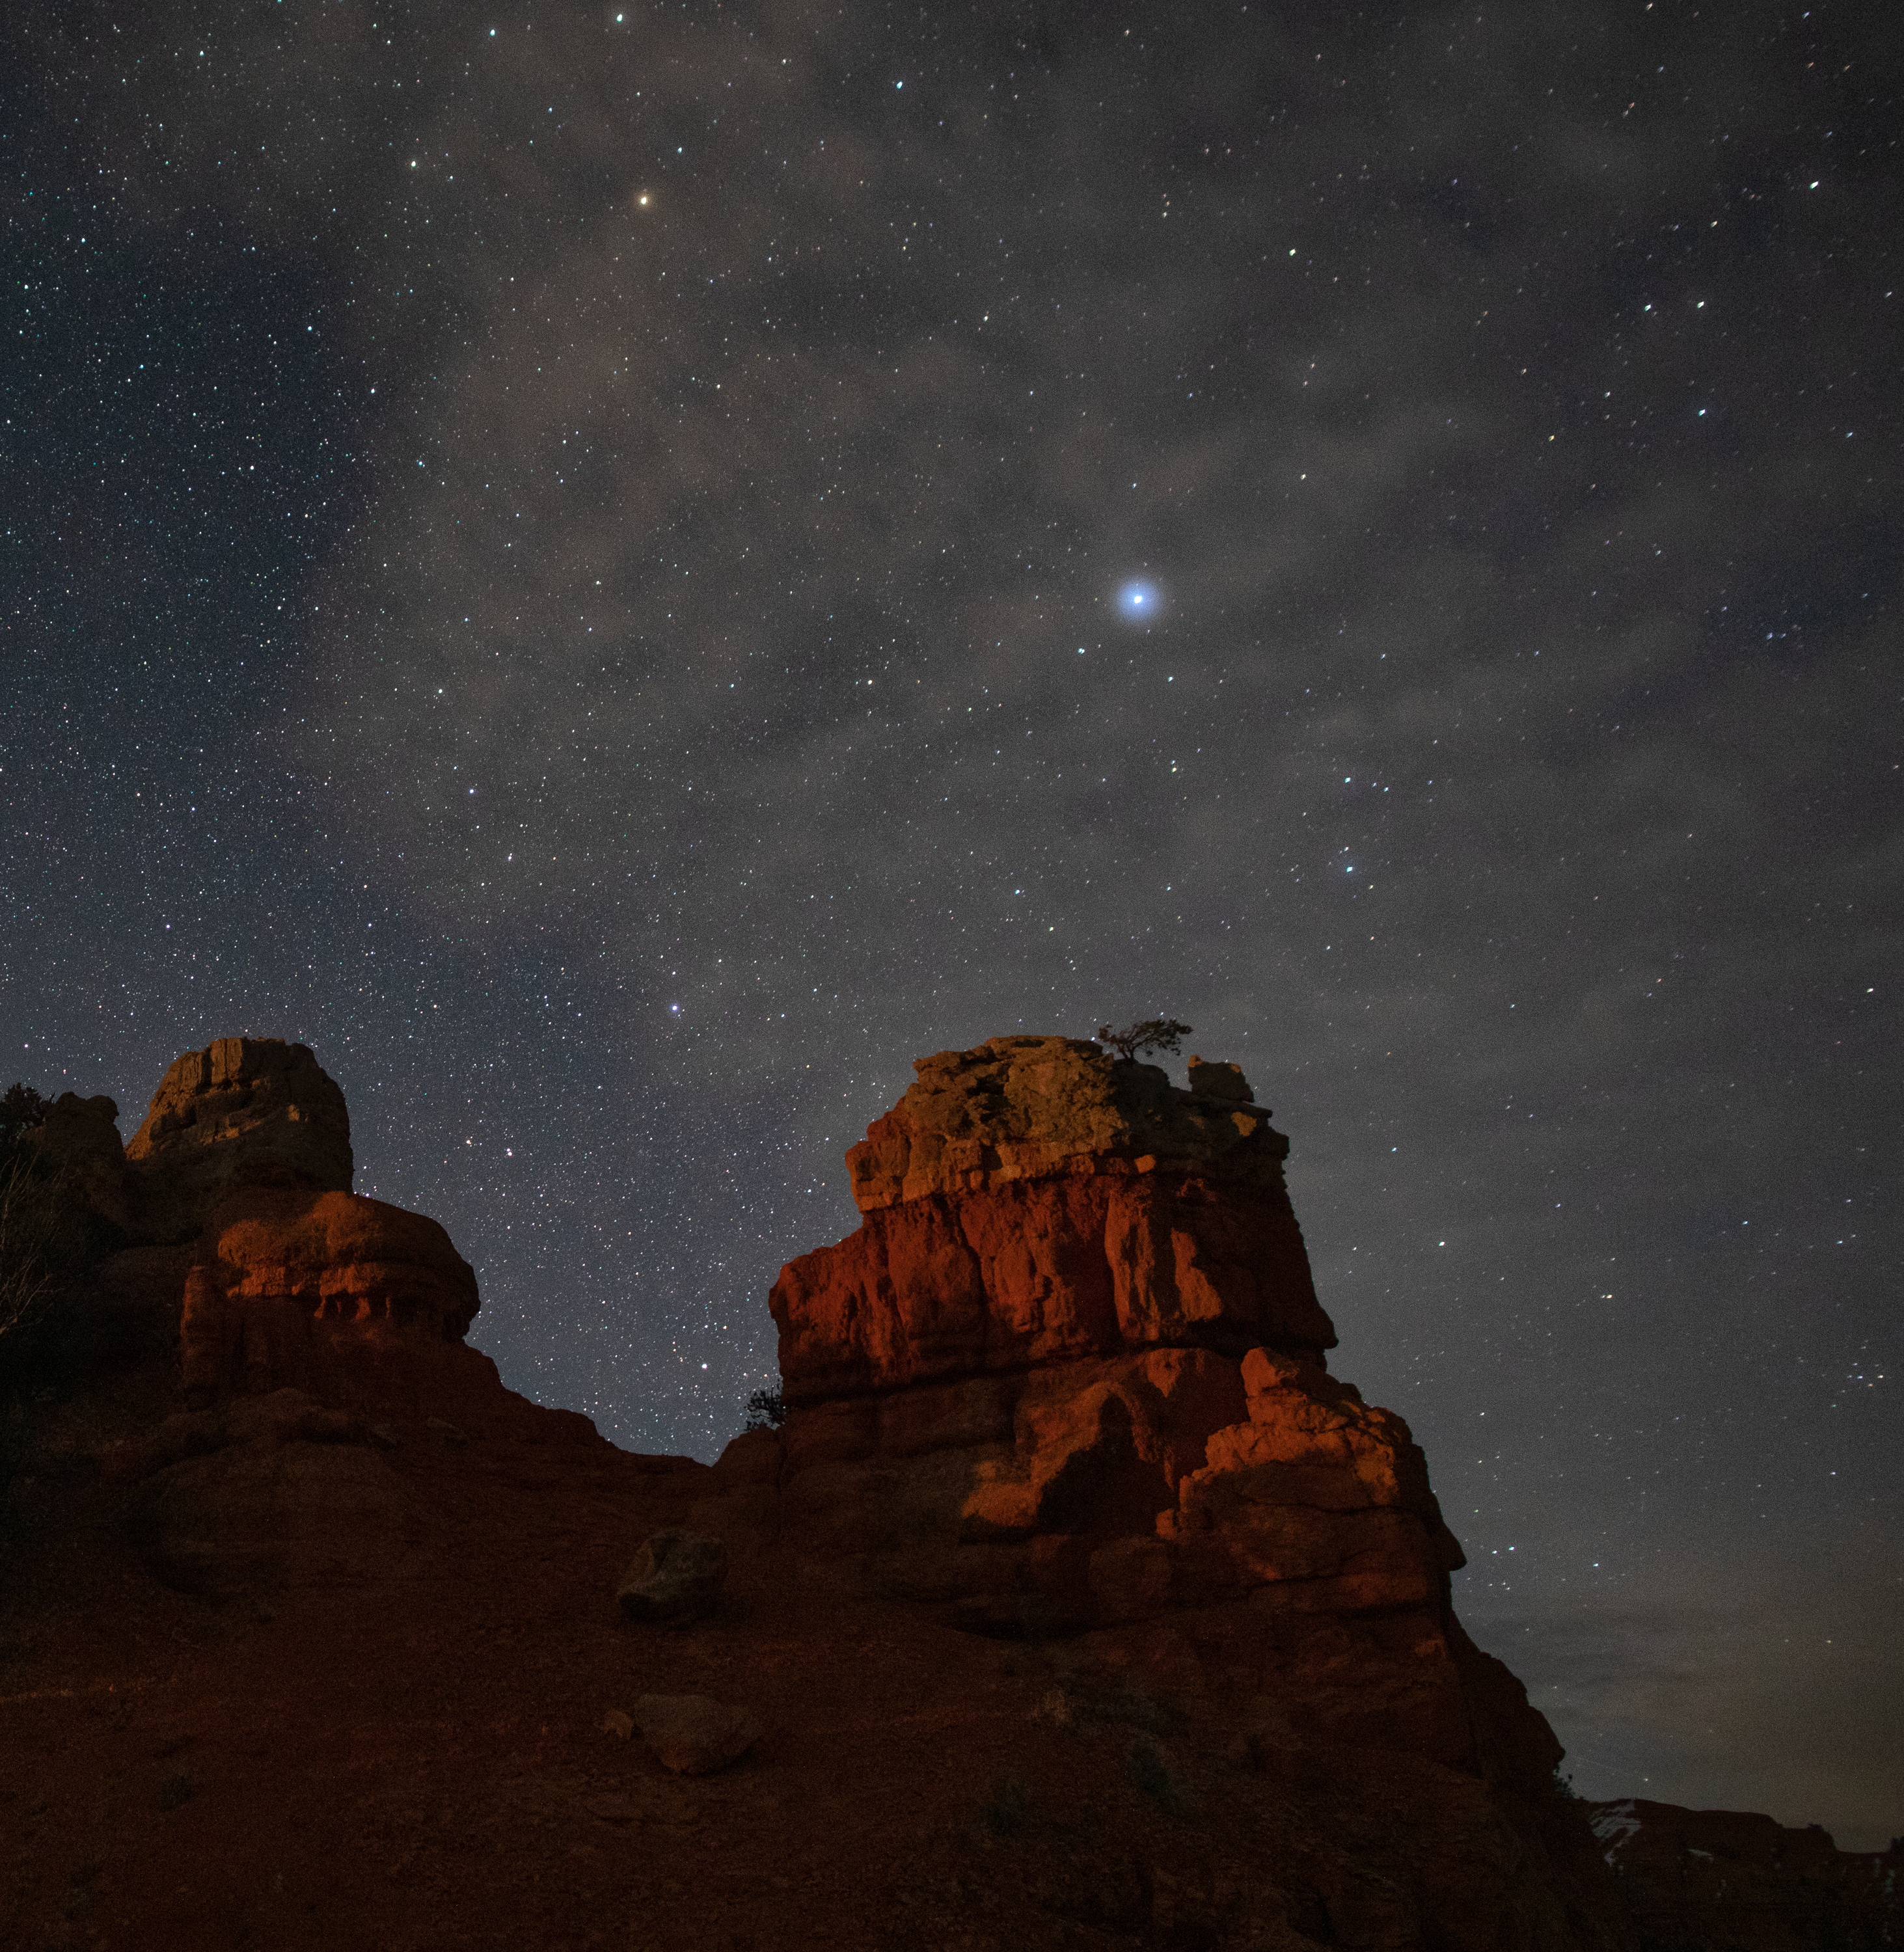 A crisp sky filled with stars frames two craggy desert peaks.